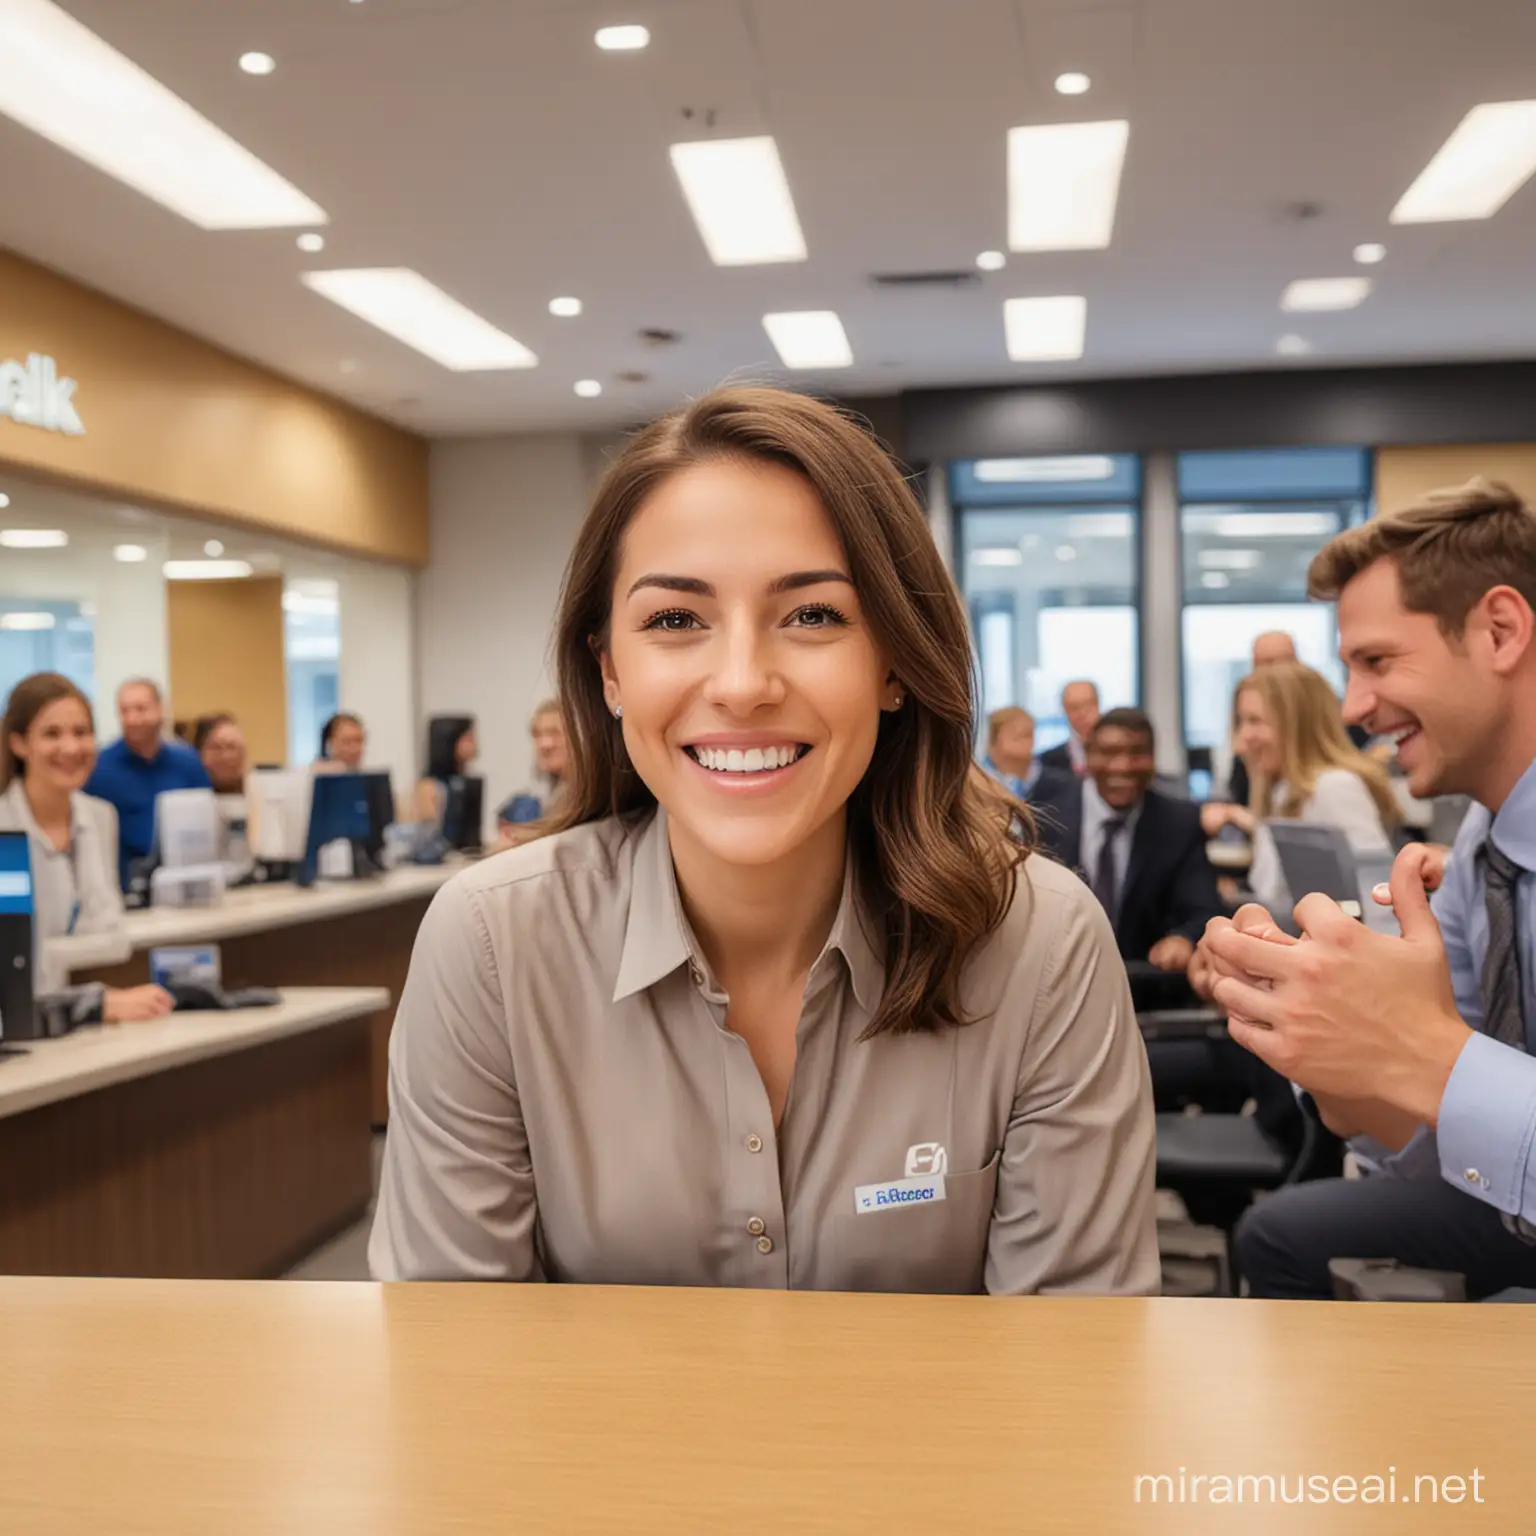 Capture images portraying the joy and happiness of employees within a bank, where they display radiant smiles and appear to communicate in a friendly and pleasant atmosphere, with an overall view